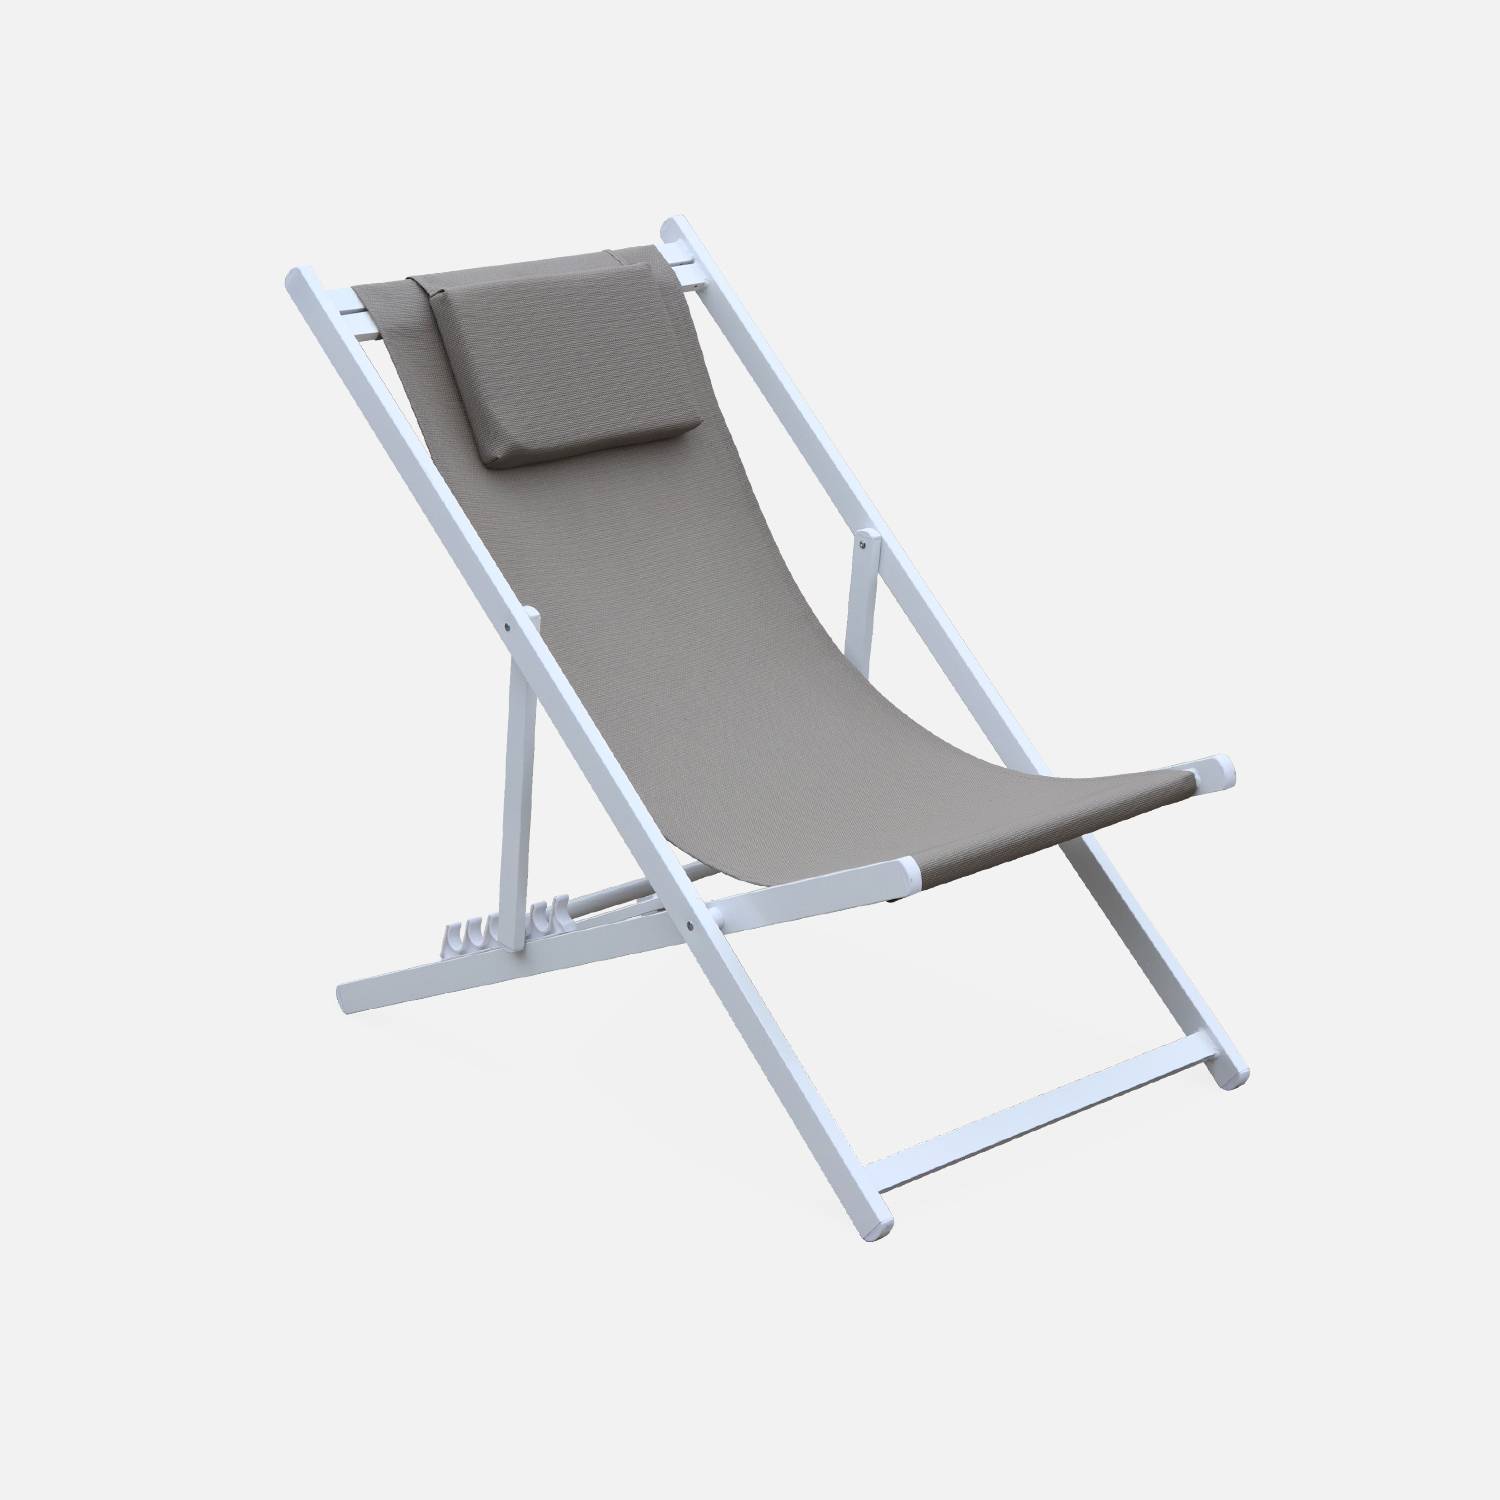 Set of 2 sun loungers - adjustable deck chairs with headrests made from aluminium frame - Gaia - White frame, Brown textilene,sweeek,Photo3